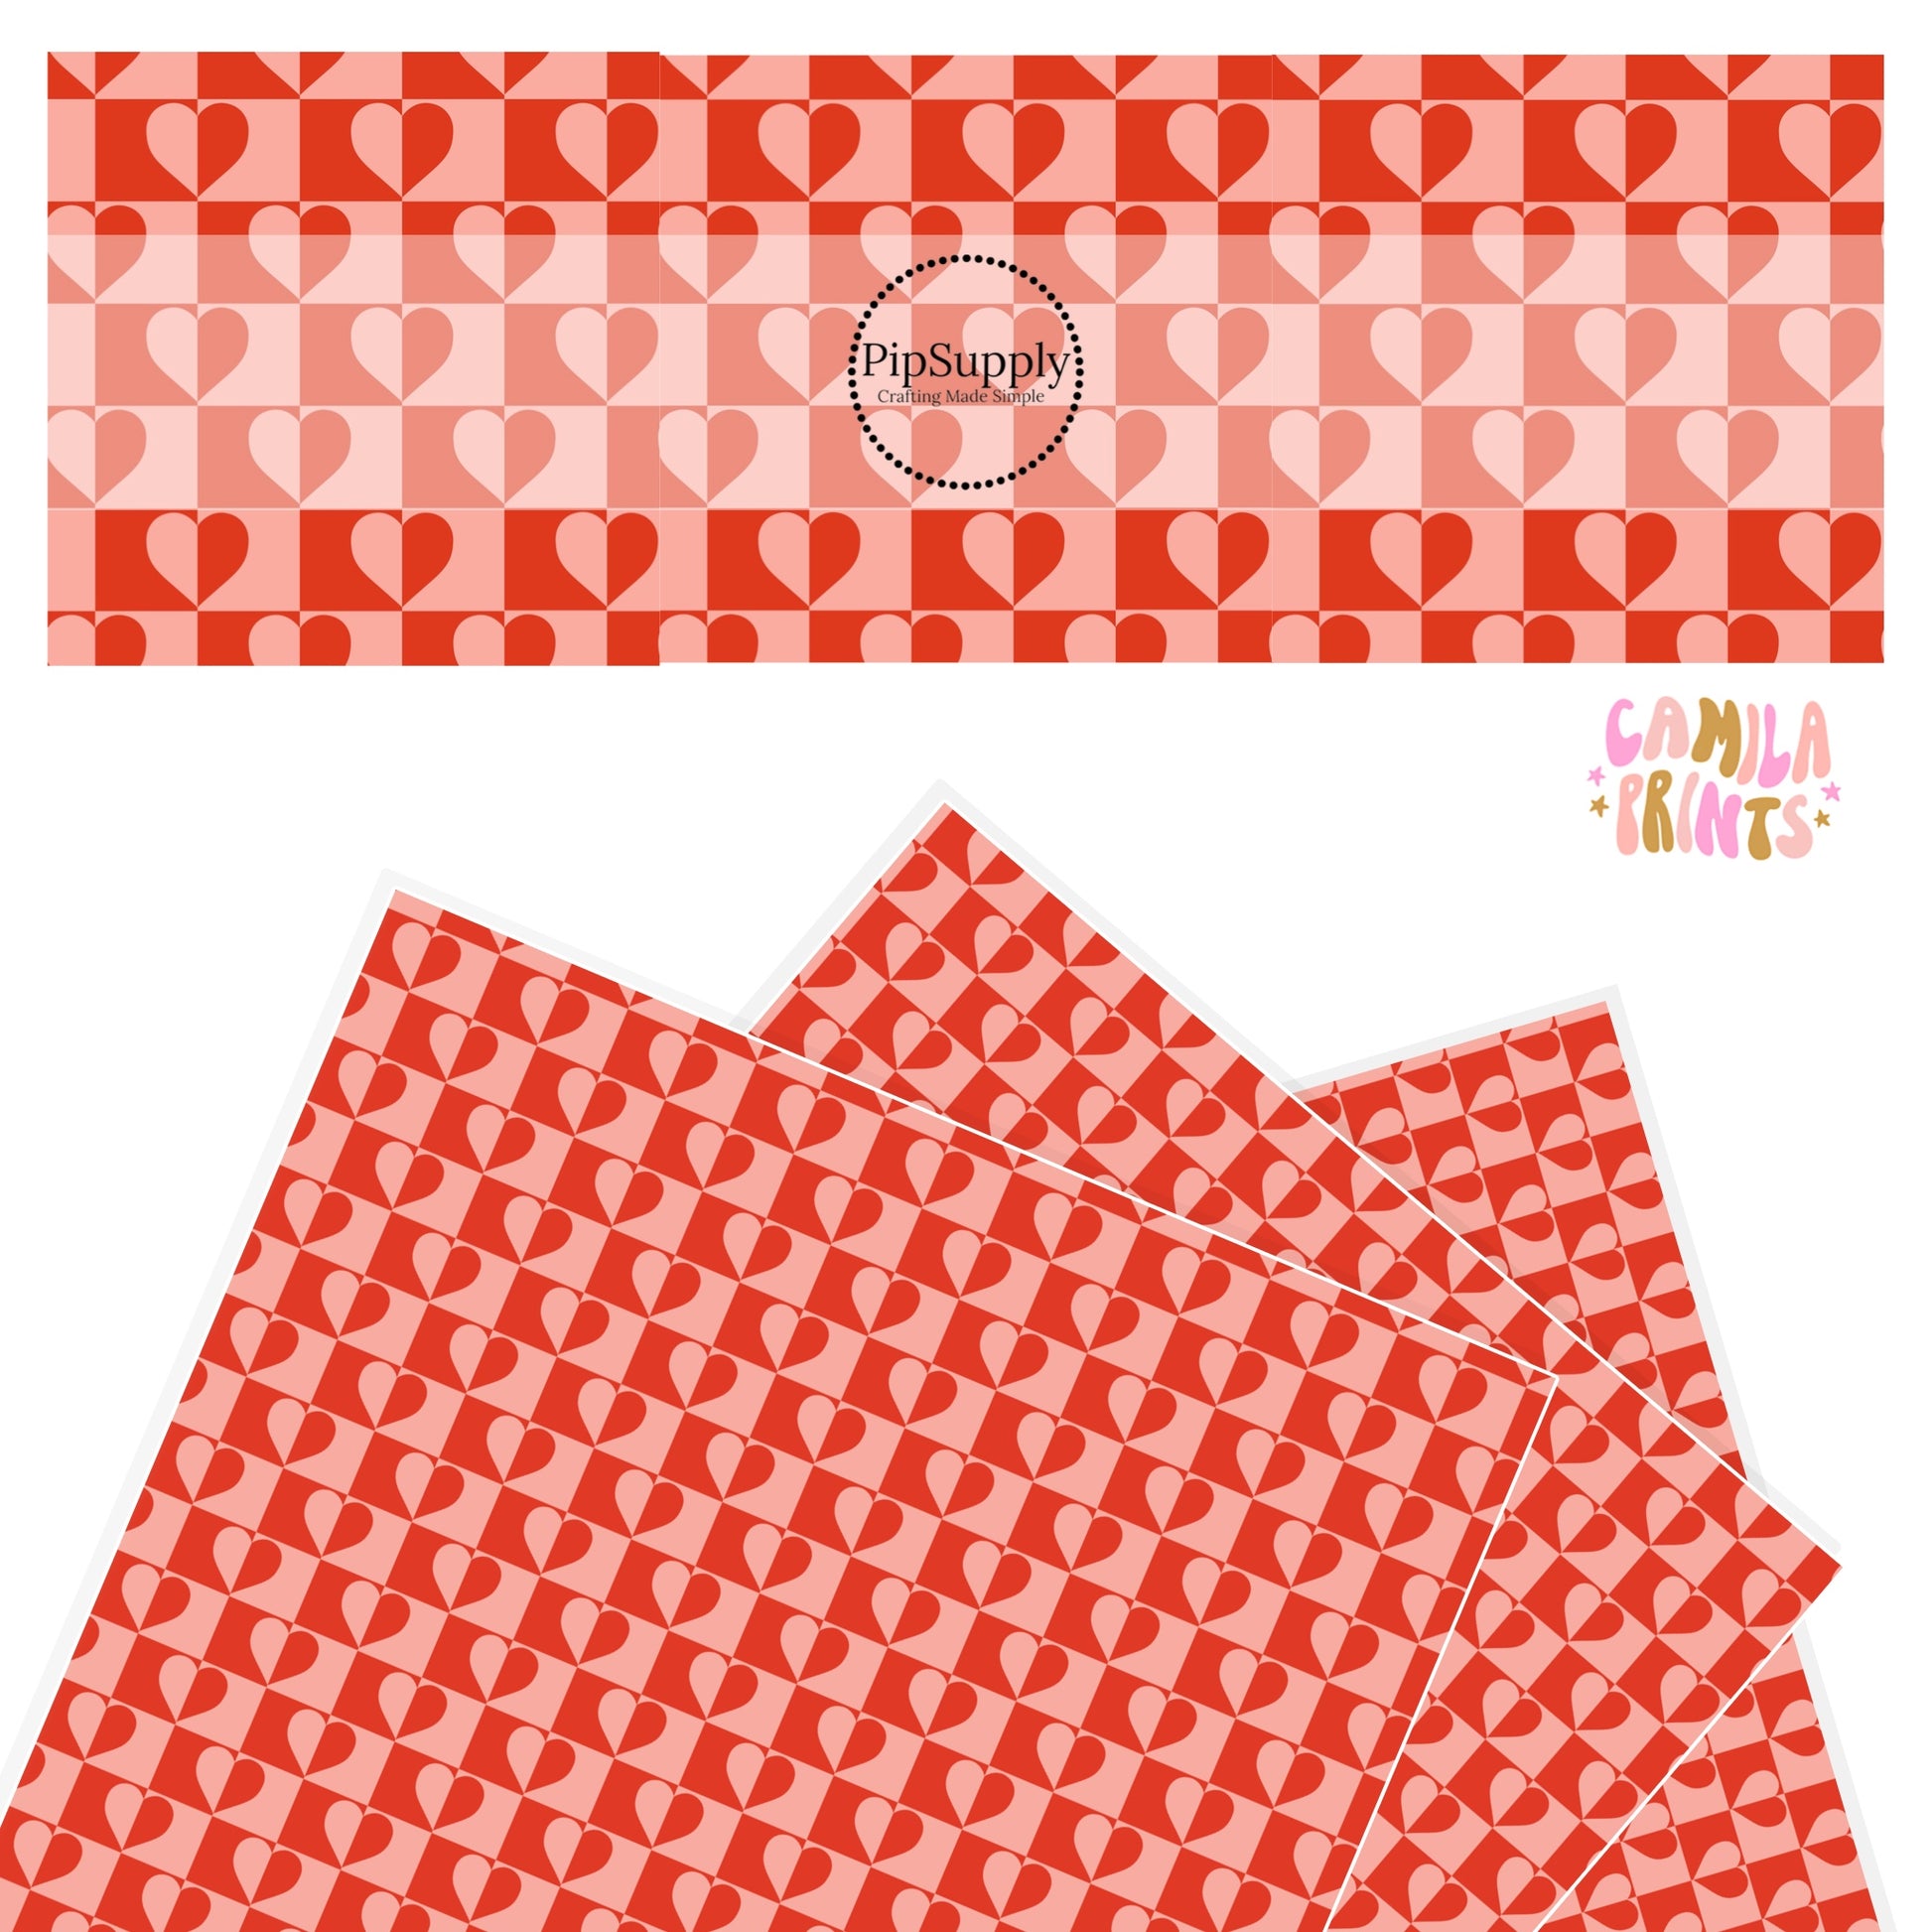 Split red and light pink hearts checkered faux leather sheets